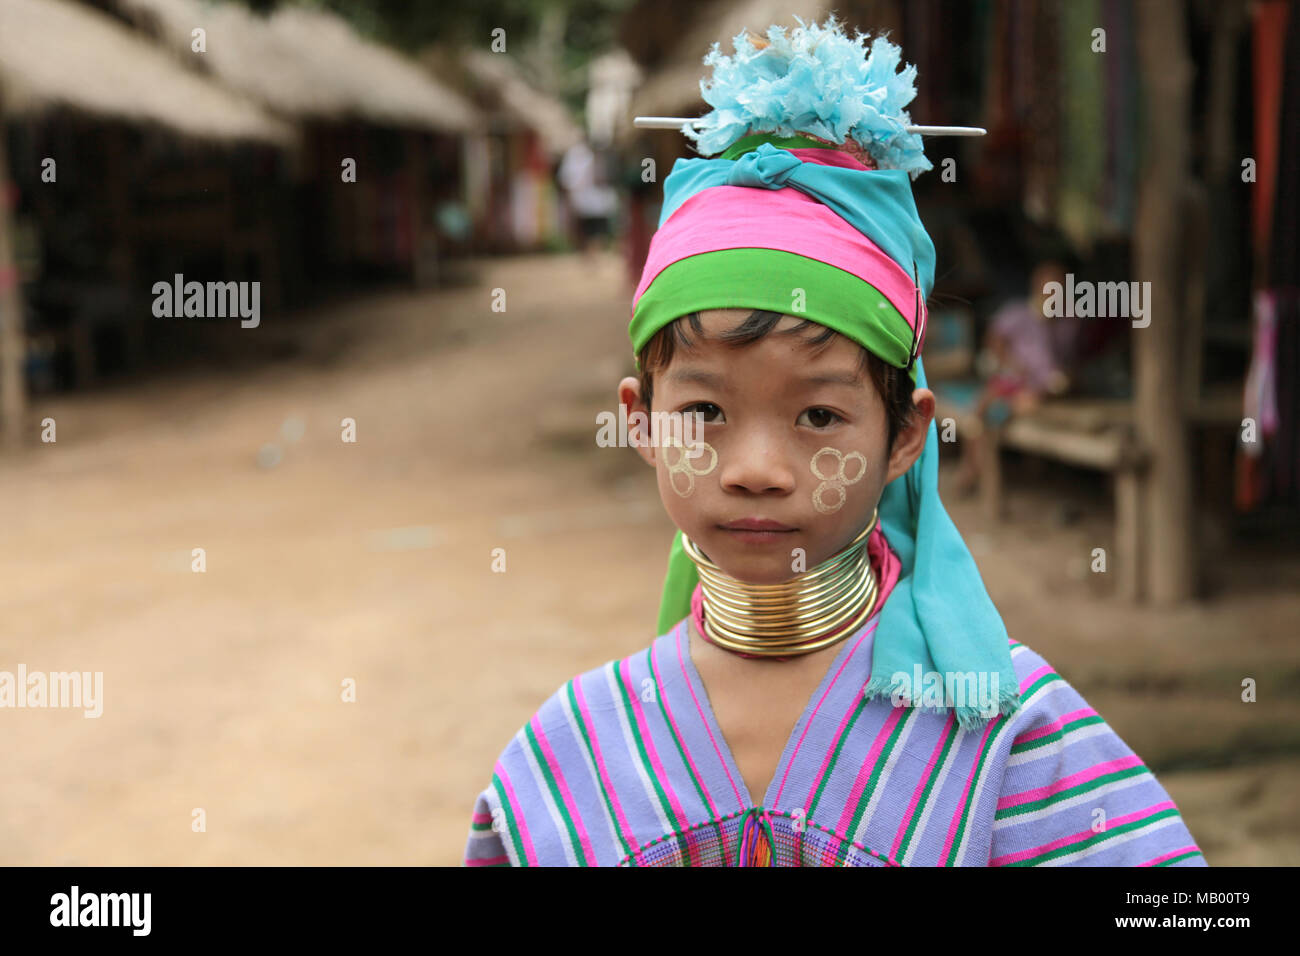 Woman from the Padaung long neck hill tribe with colourful dress